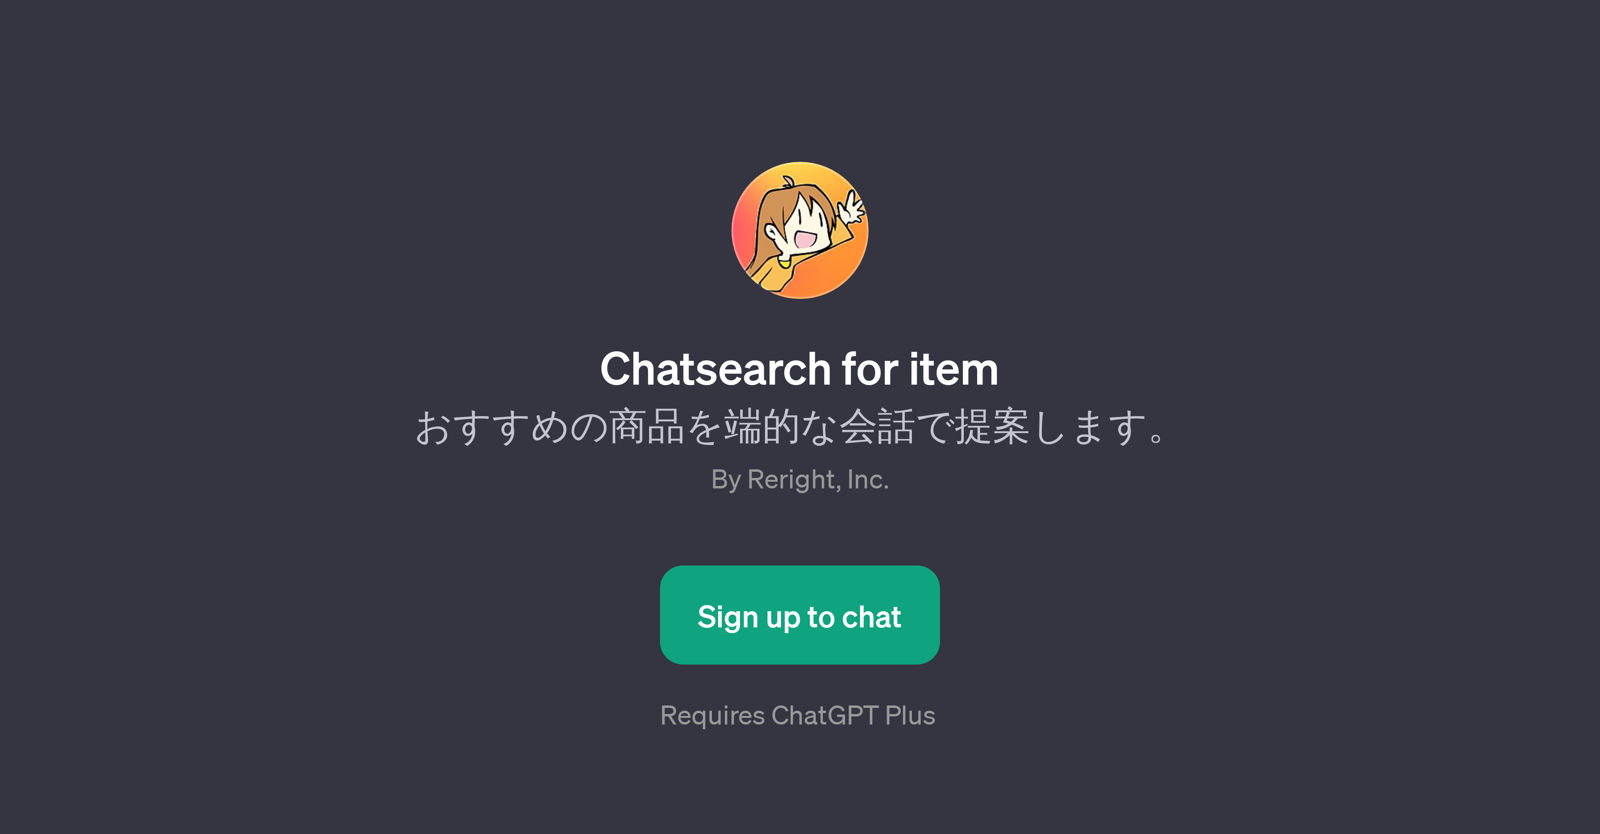 Chatsearch for item website